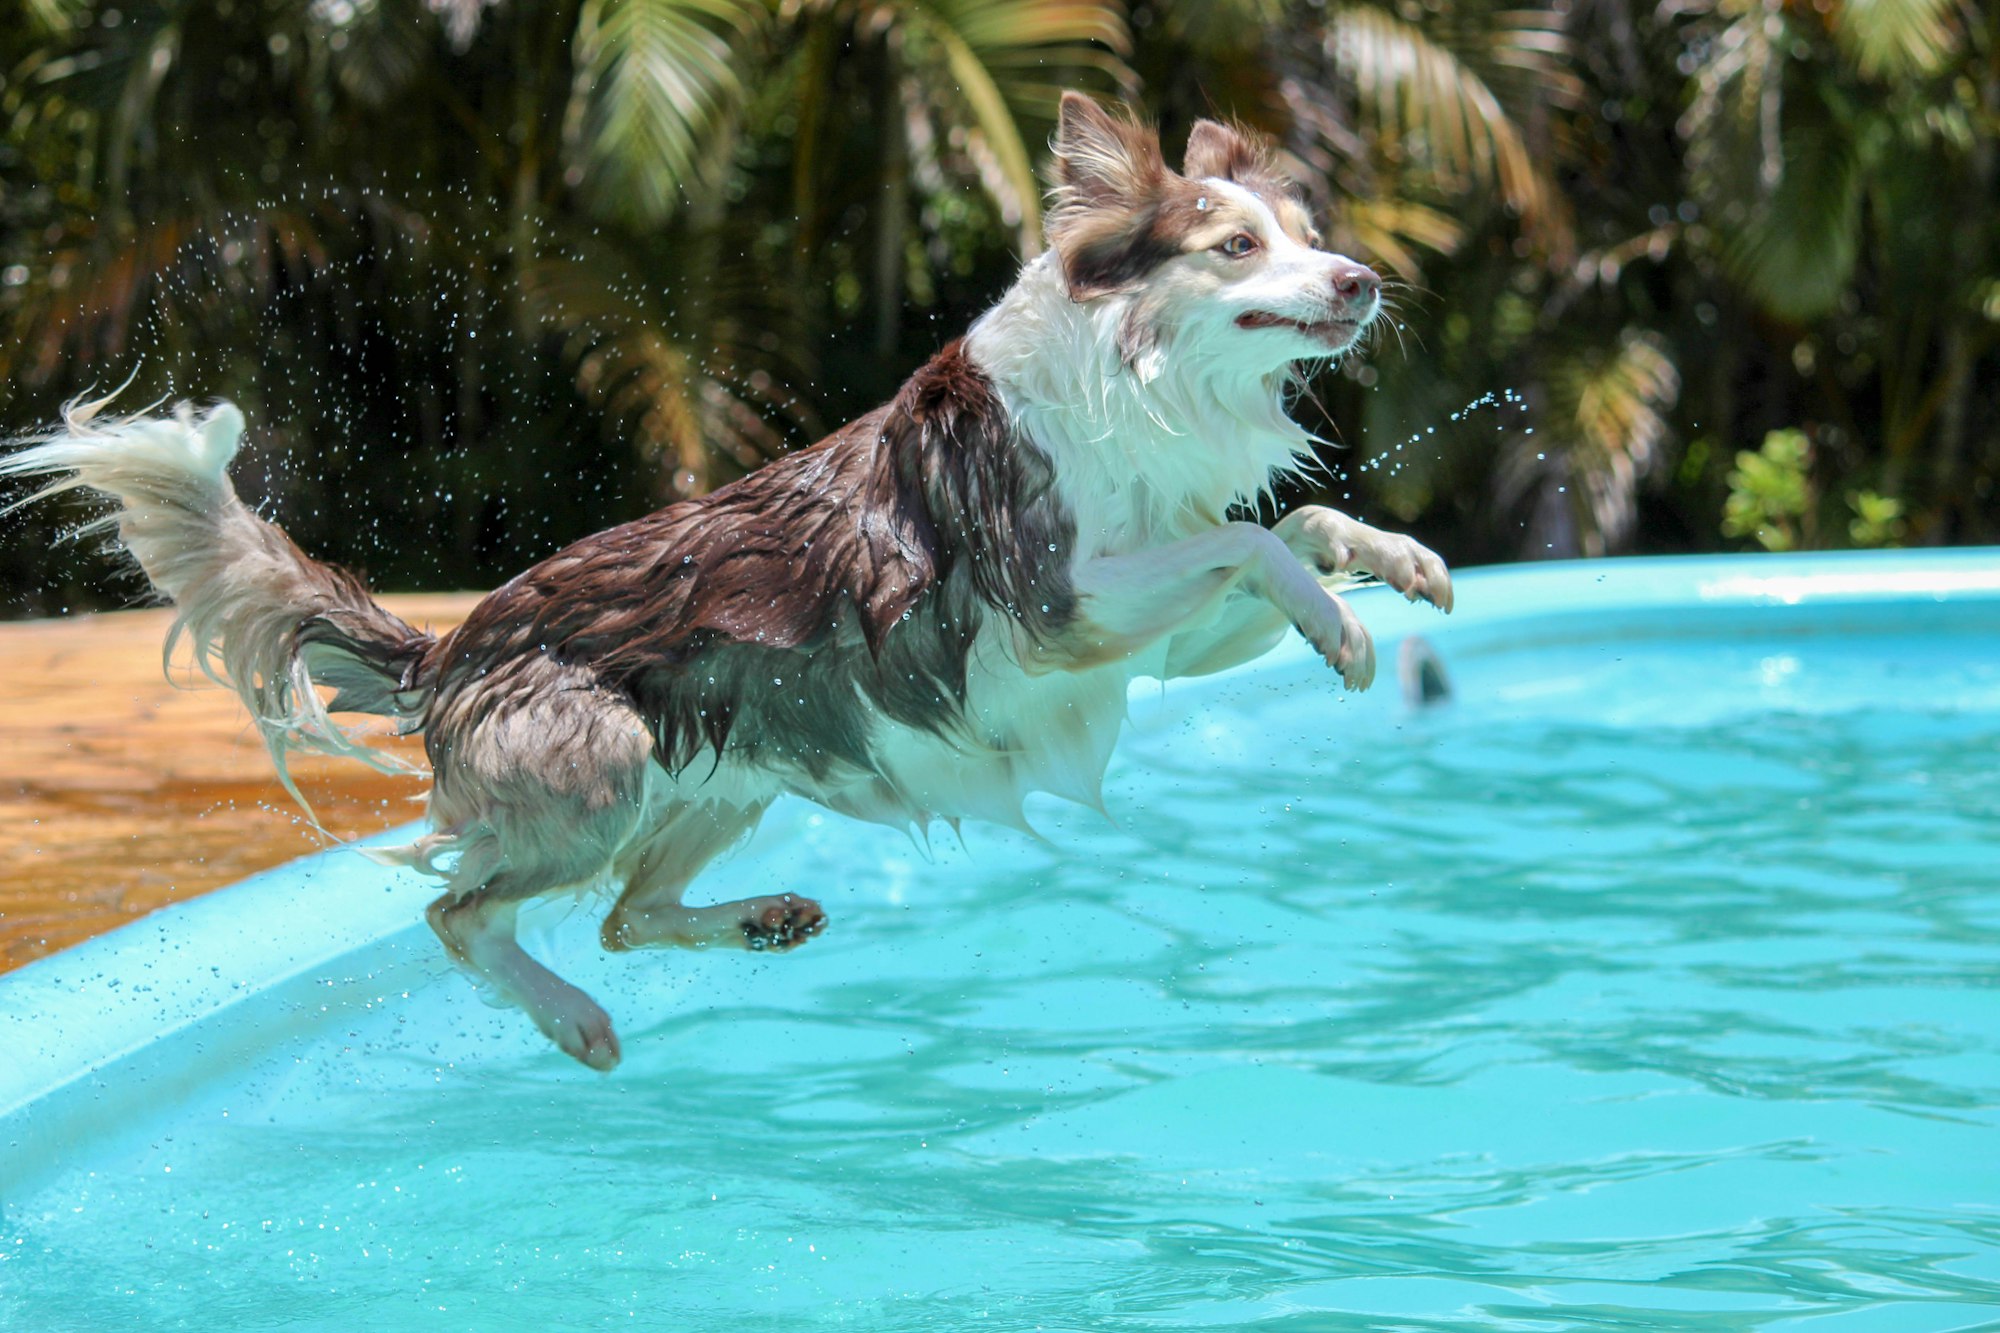 Dog leaping into pool on sunny day.